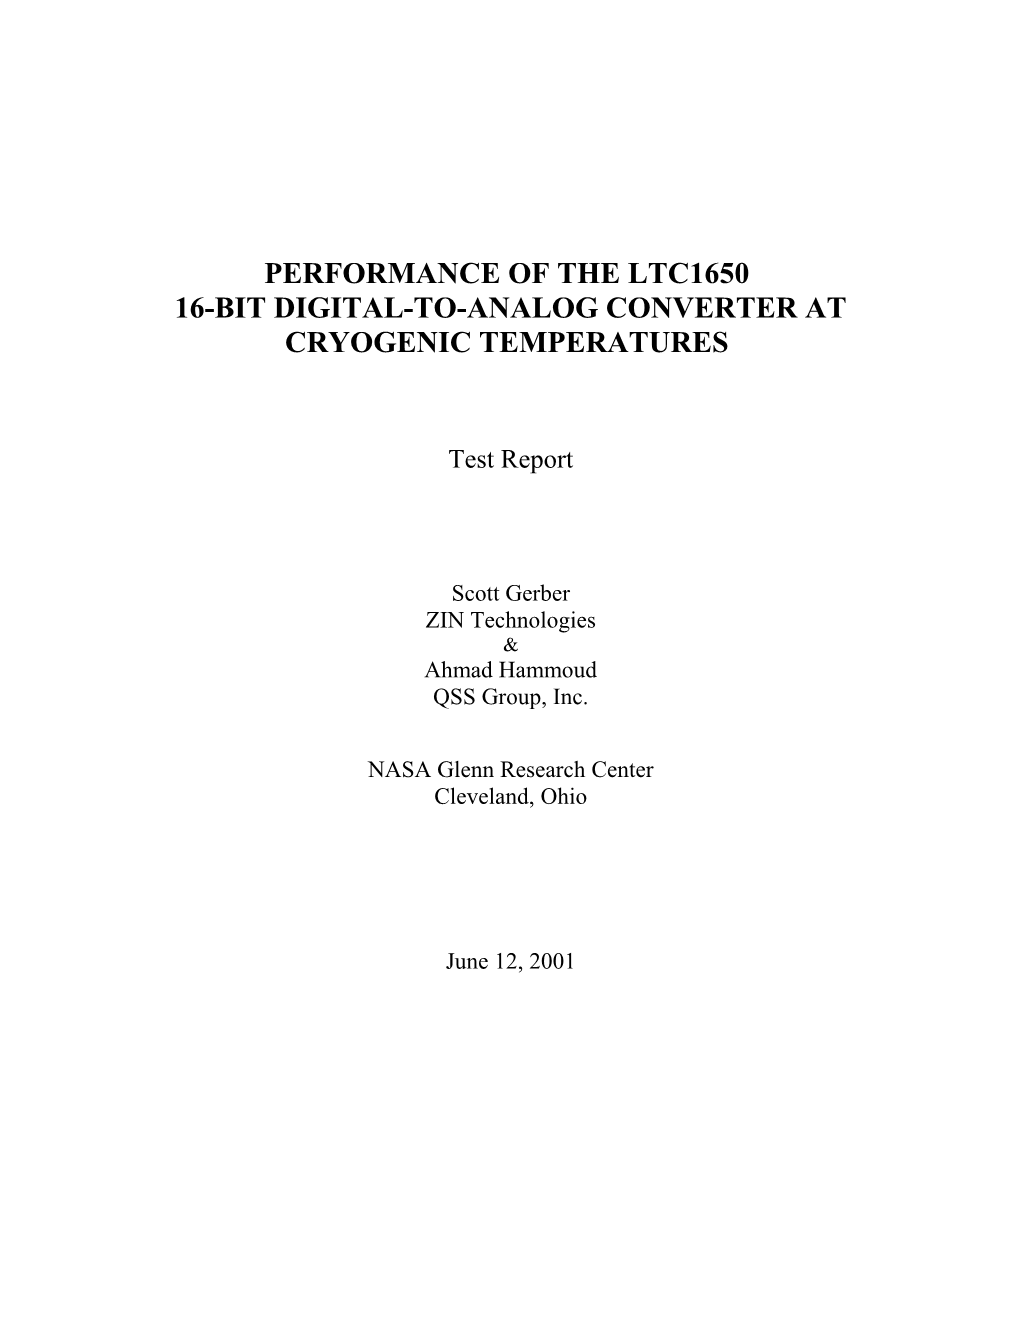 Performance of the Ltc1650 16-Bit Digital-To-Analog Converter at Cryogenic Temperatures